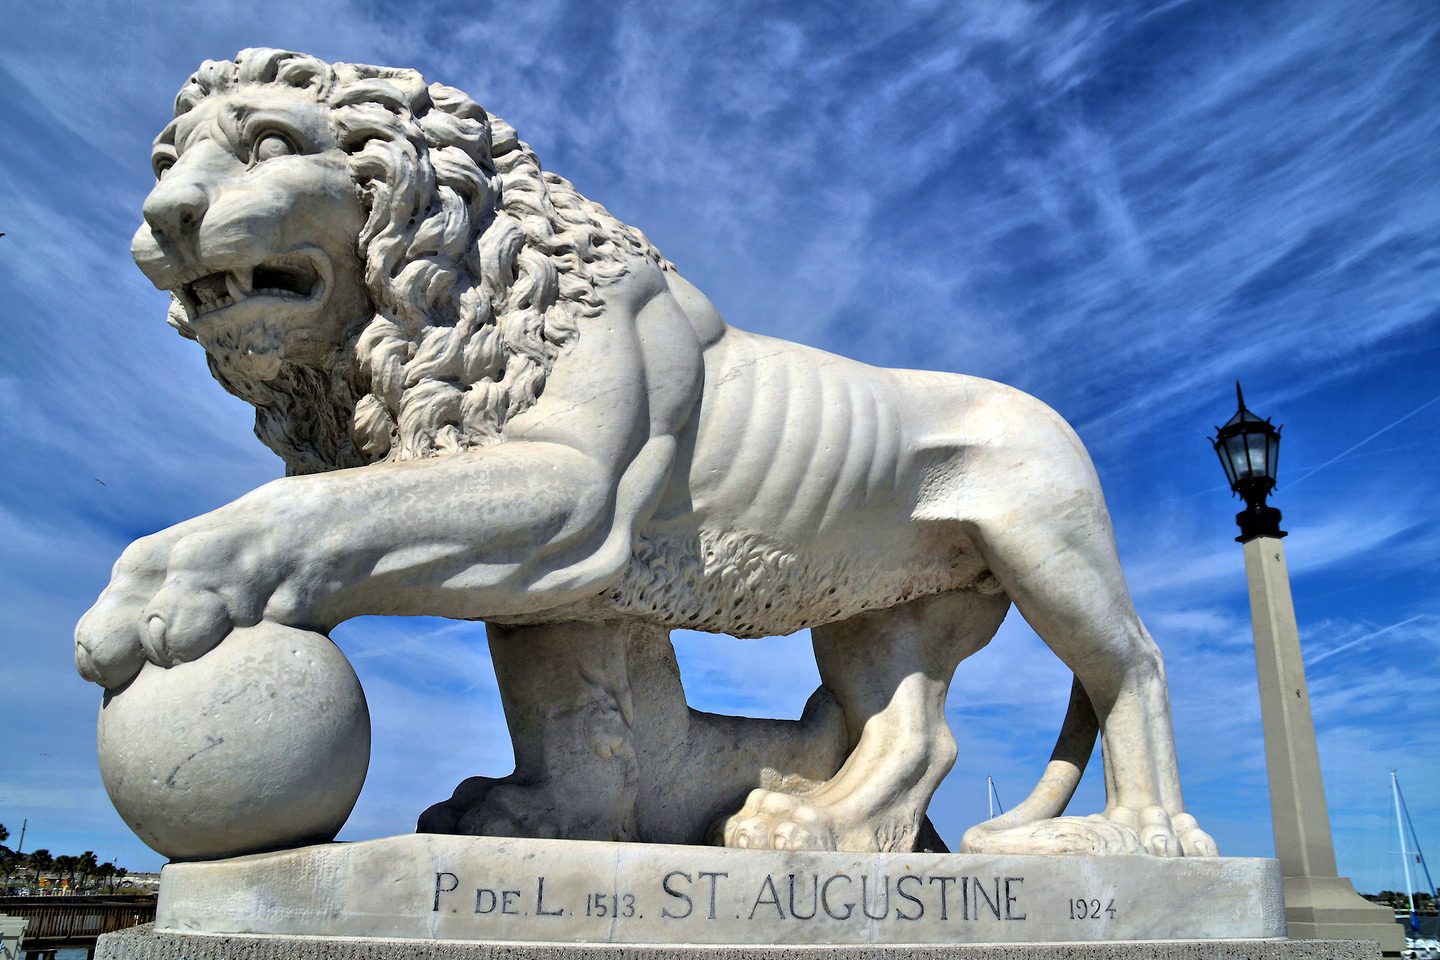 the lion and the statue